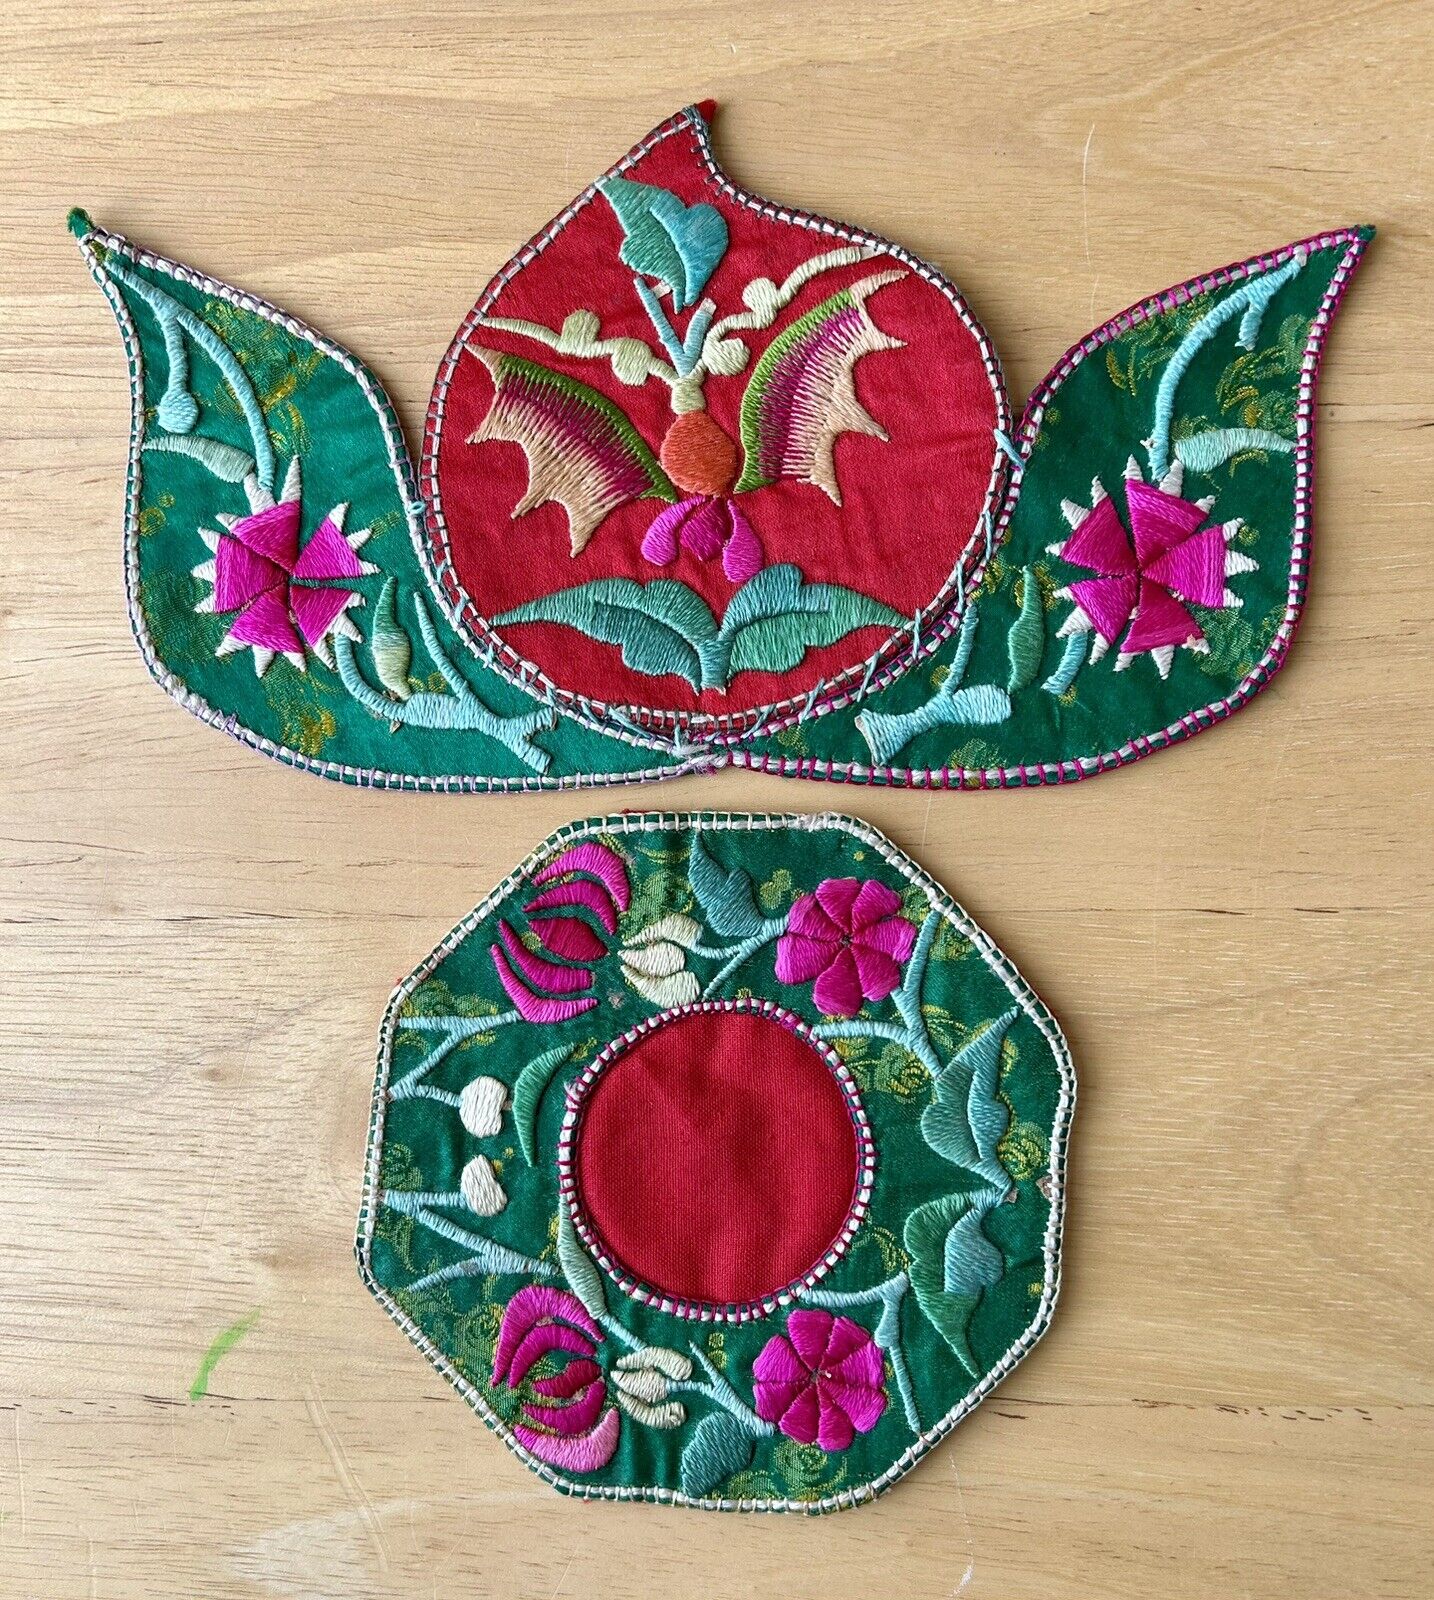 TWO MIAO HILL TRIBE HMONG EMBROIDERY PATCHES PIECES